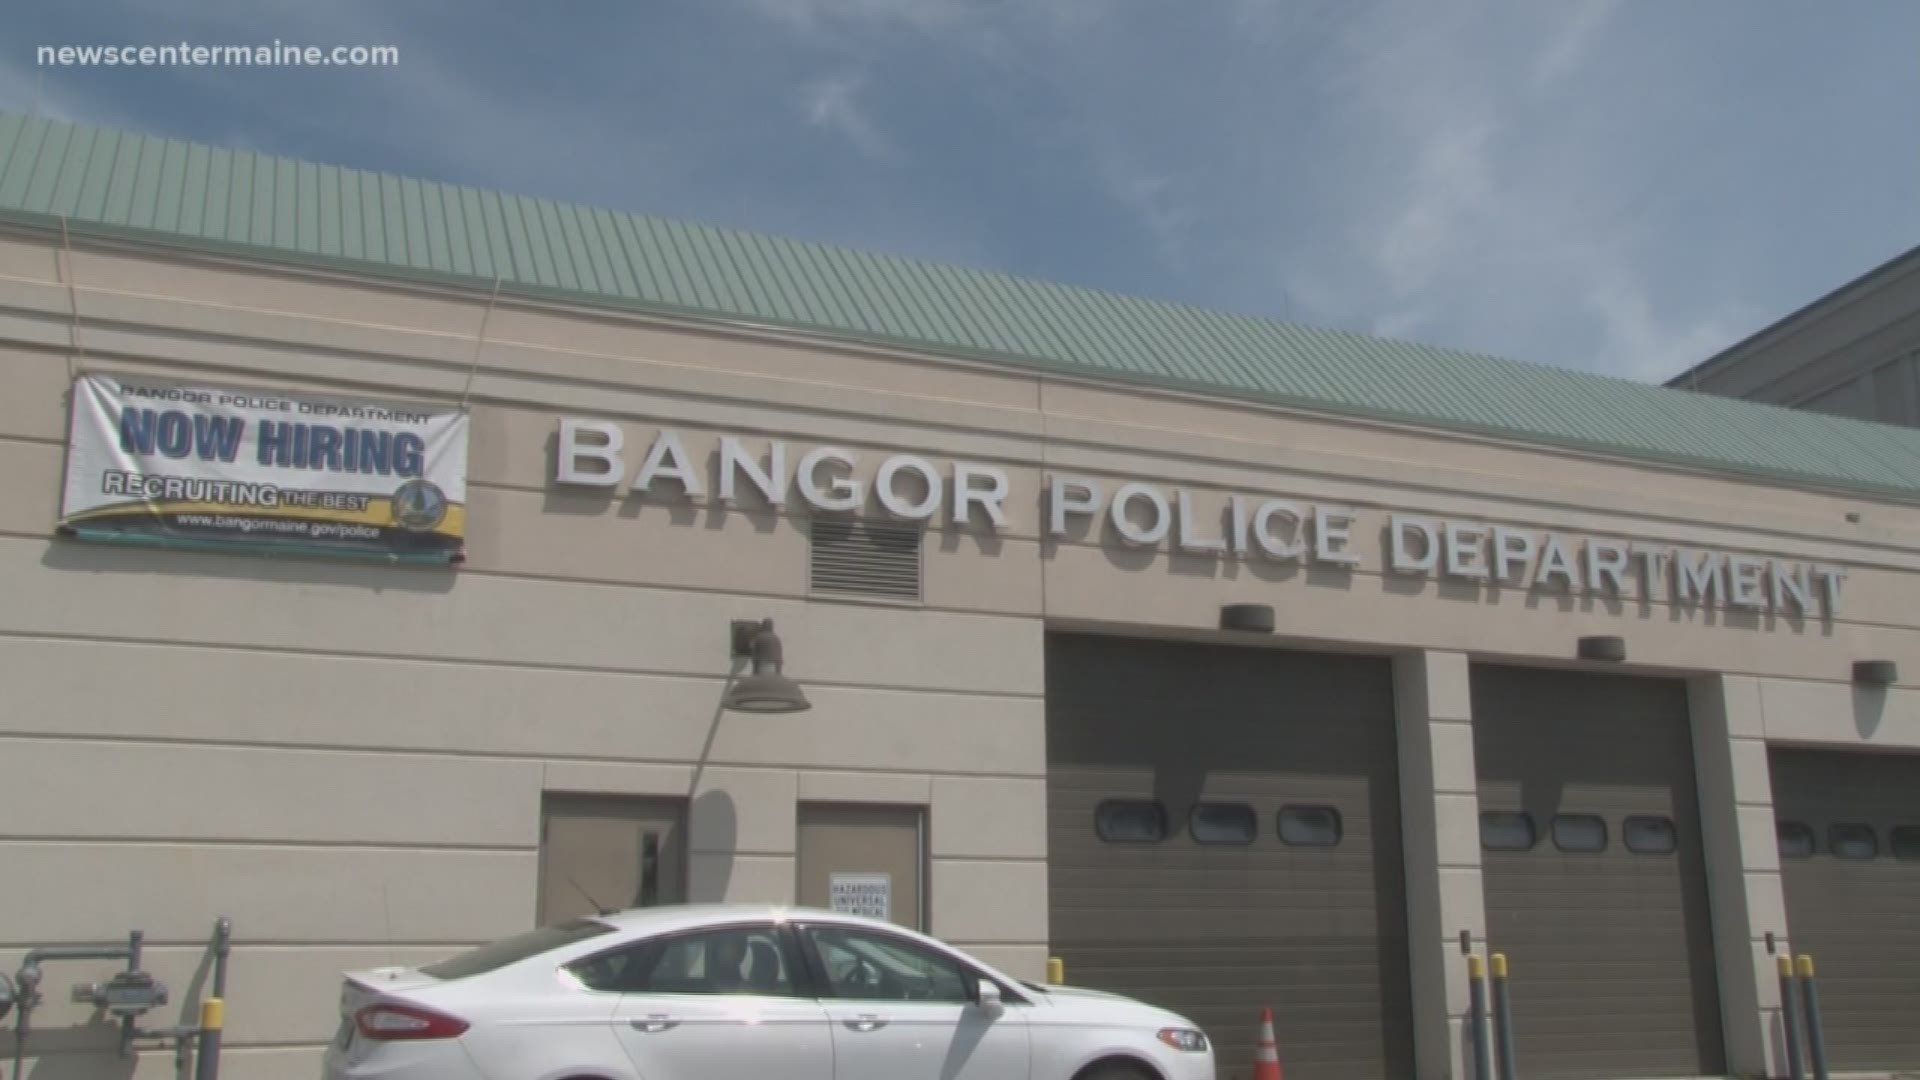 Bangor Police Department looking for new recruits